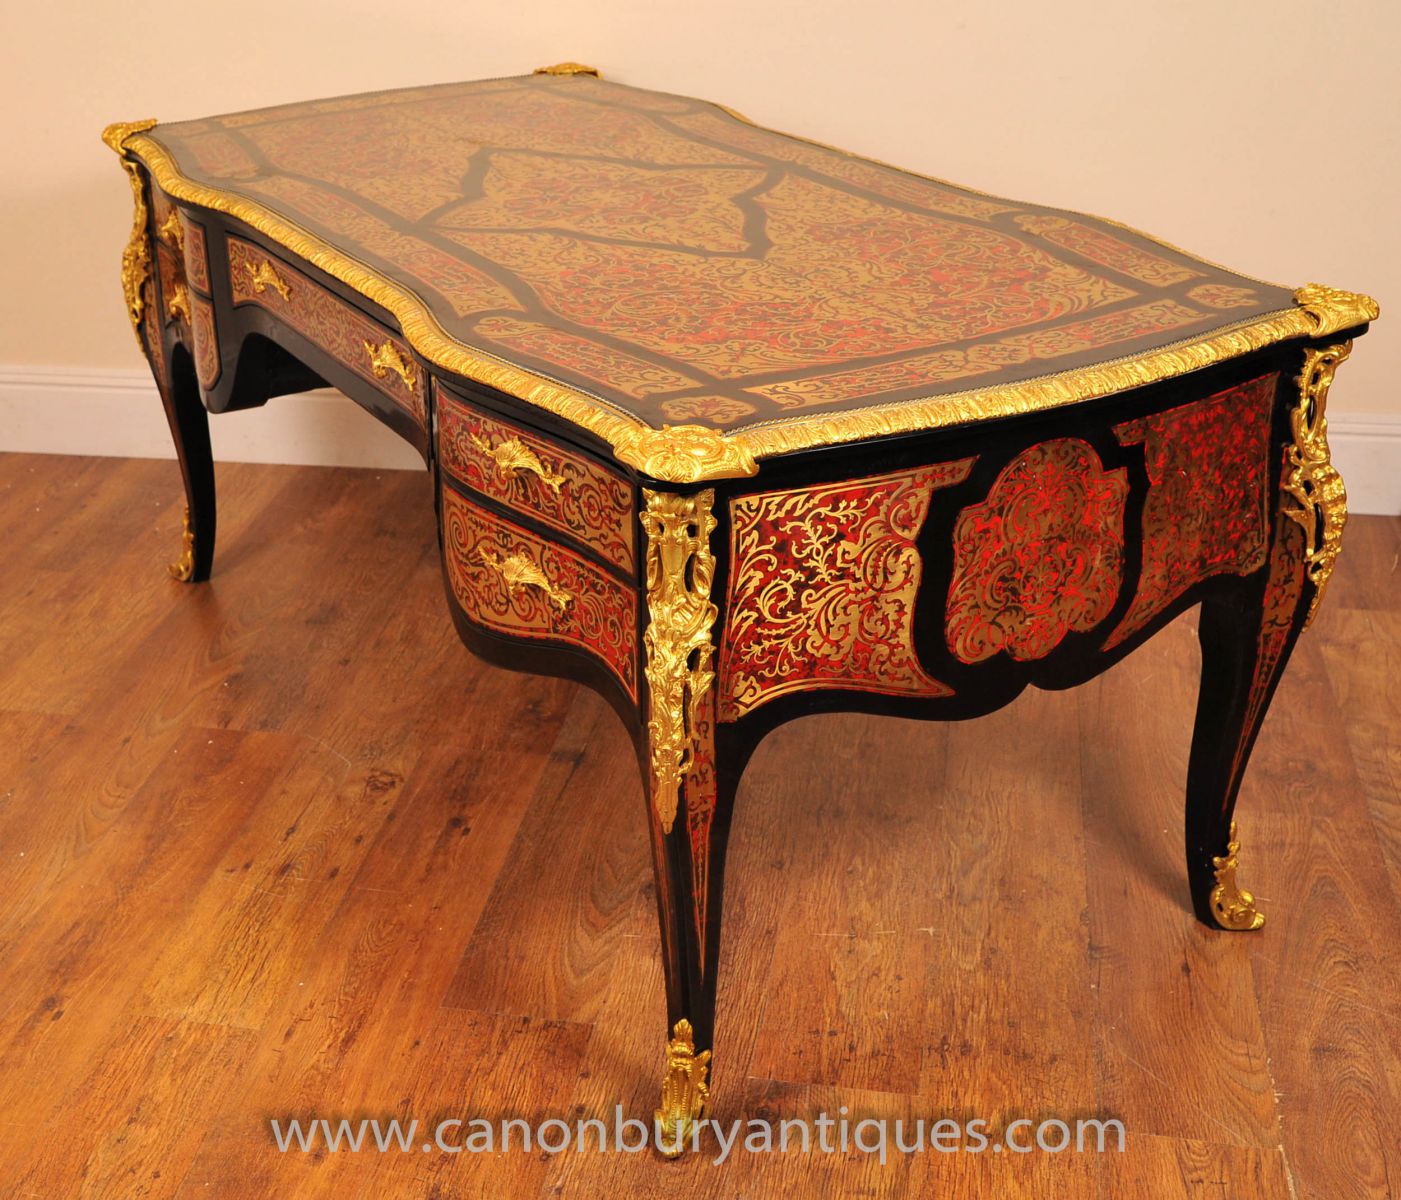 A Boulle desk, characterised by the distinctive brass, ebony and tortoise shell inaly work